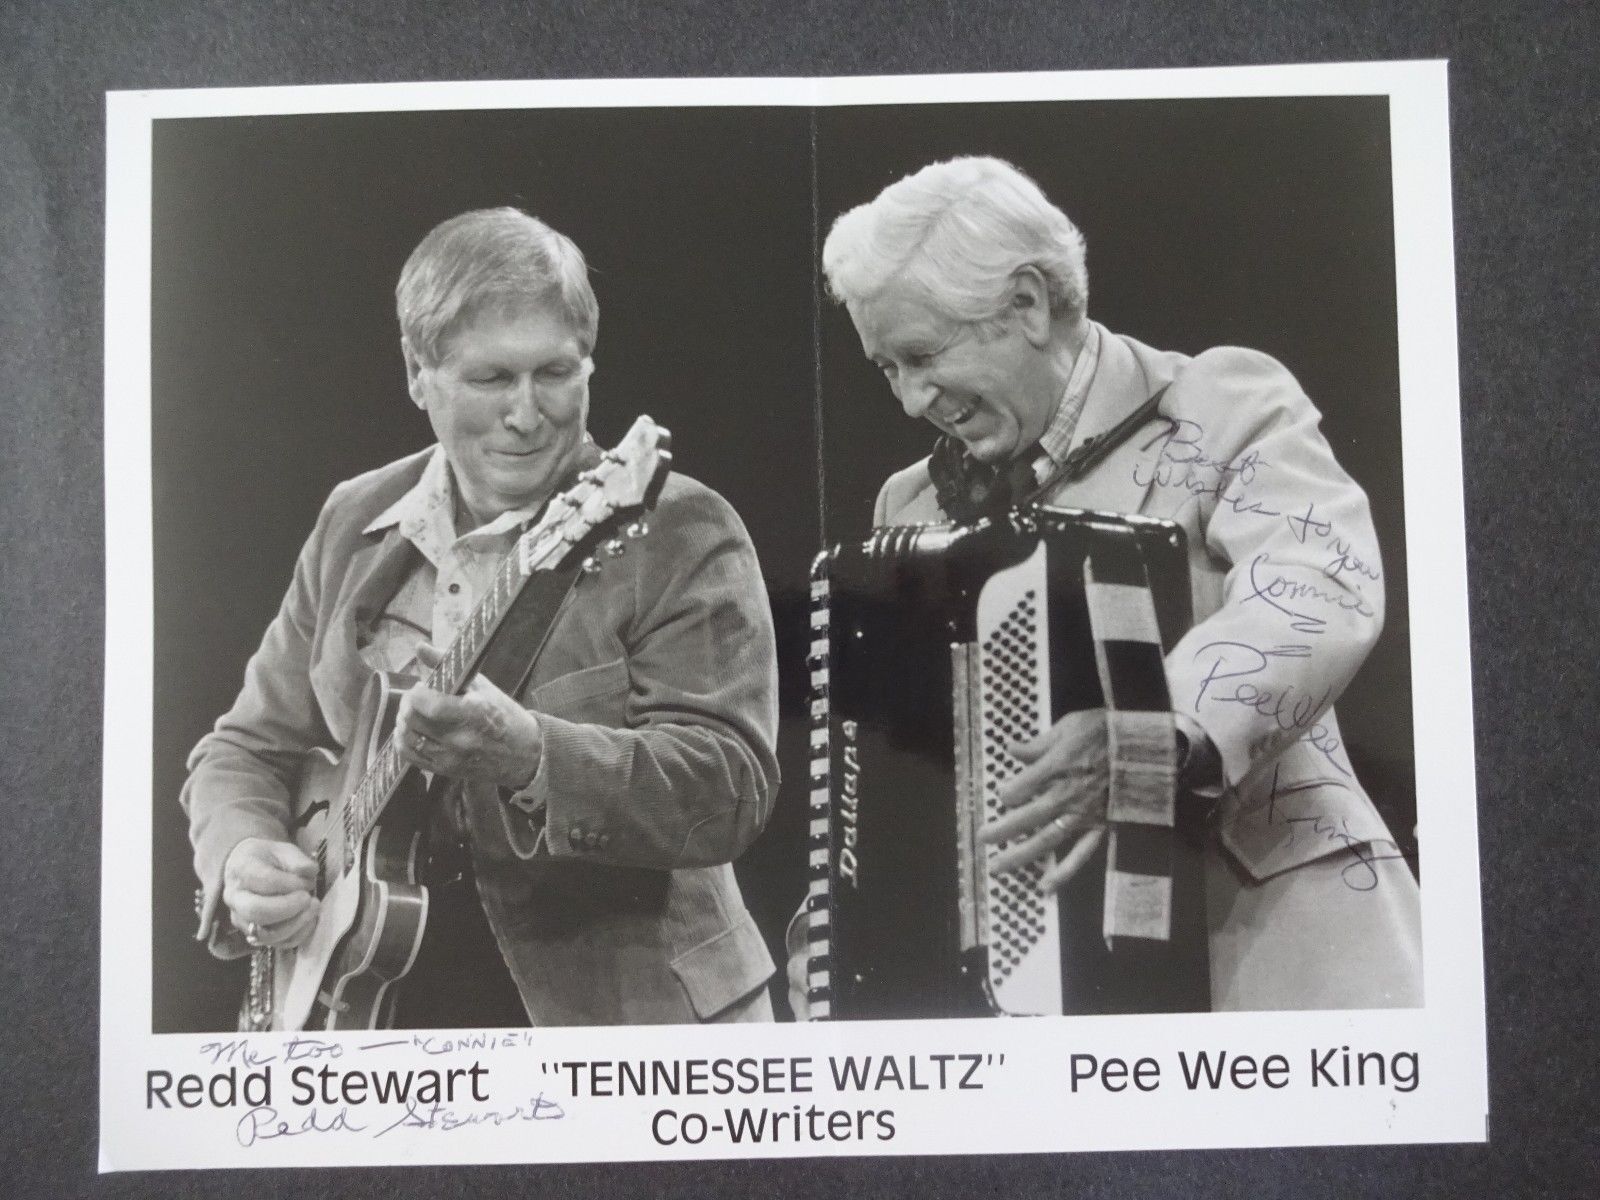 ORIGINAL, SIGNED & Inscribed B/W Redd Stewart & Pee Wee King Promo Photo Poster painting